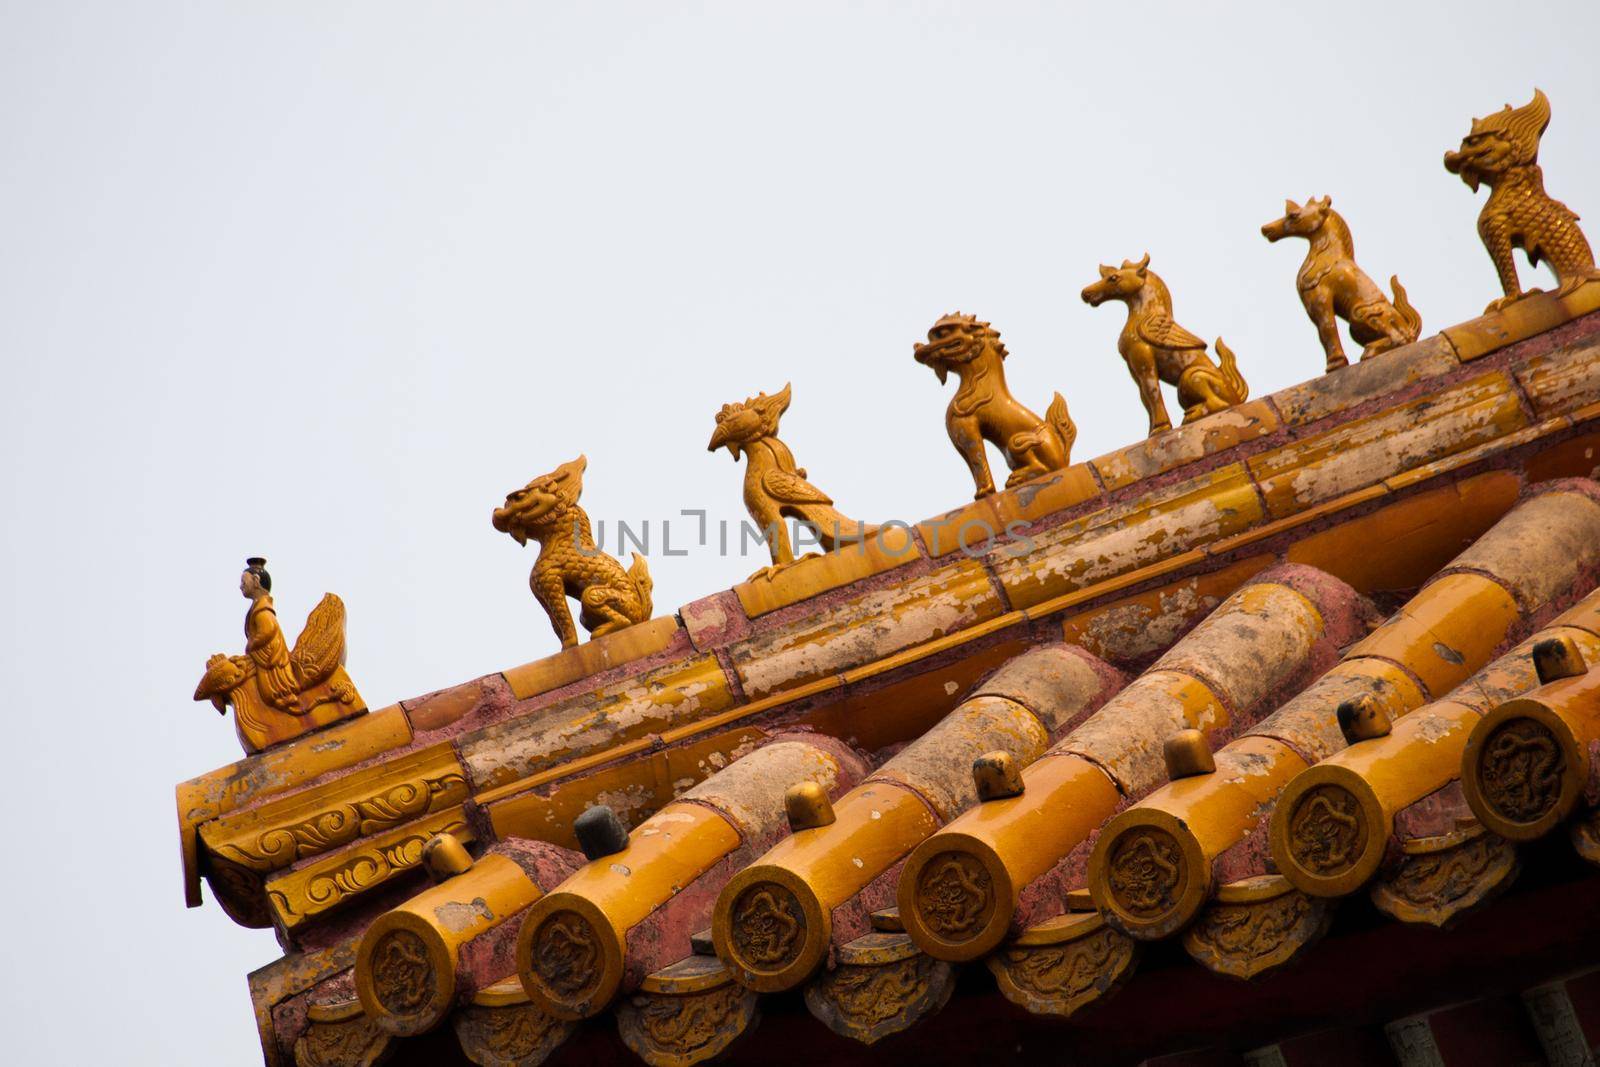 Facade and roofs details, Forbidden City in Beijing. Imperial palace in China.